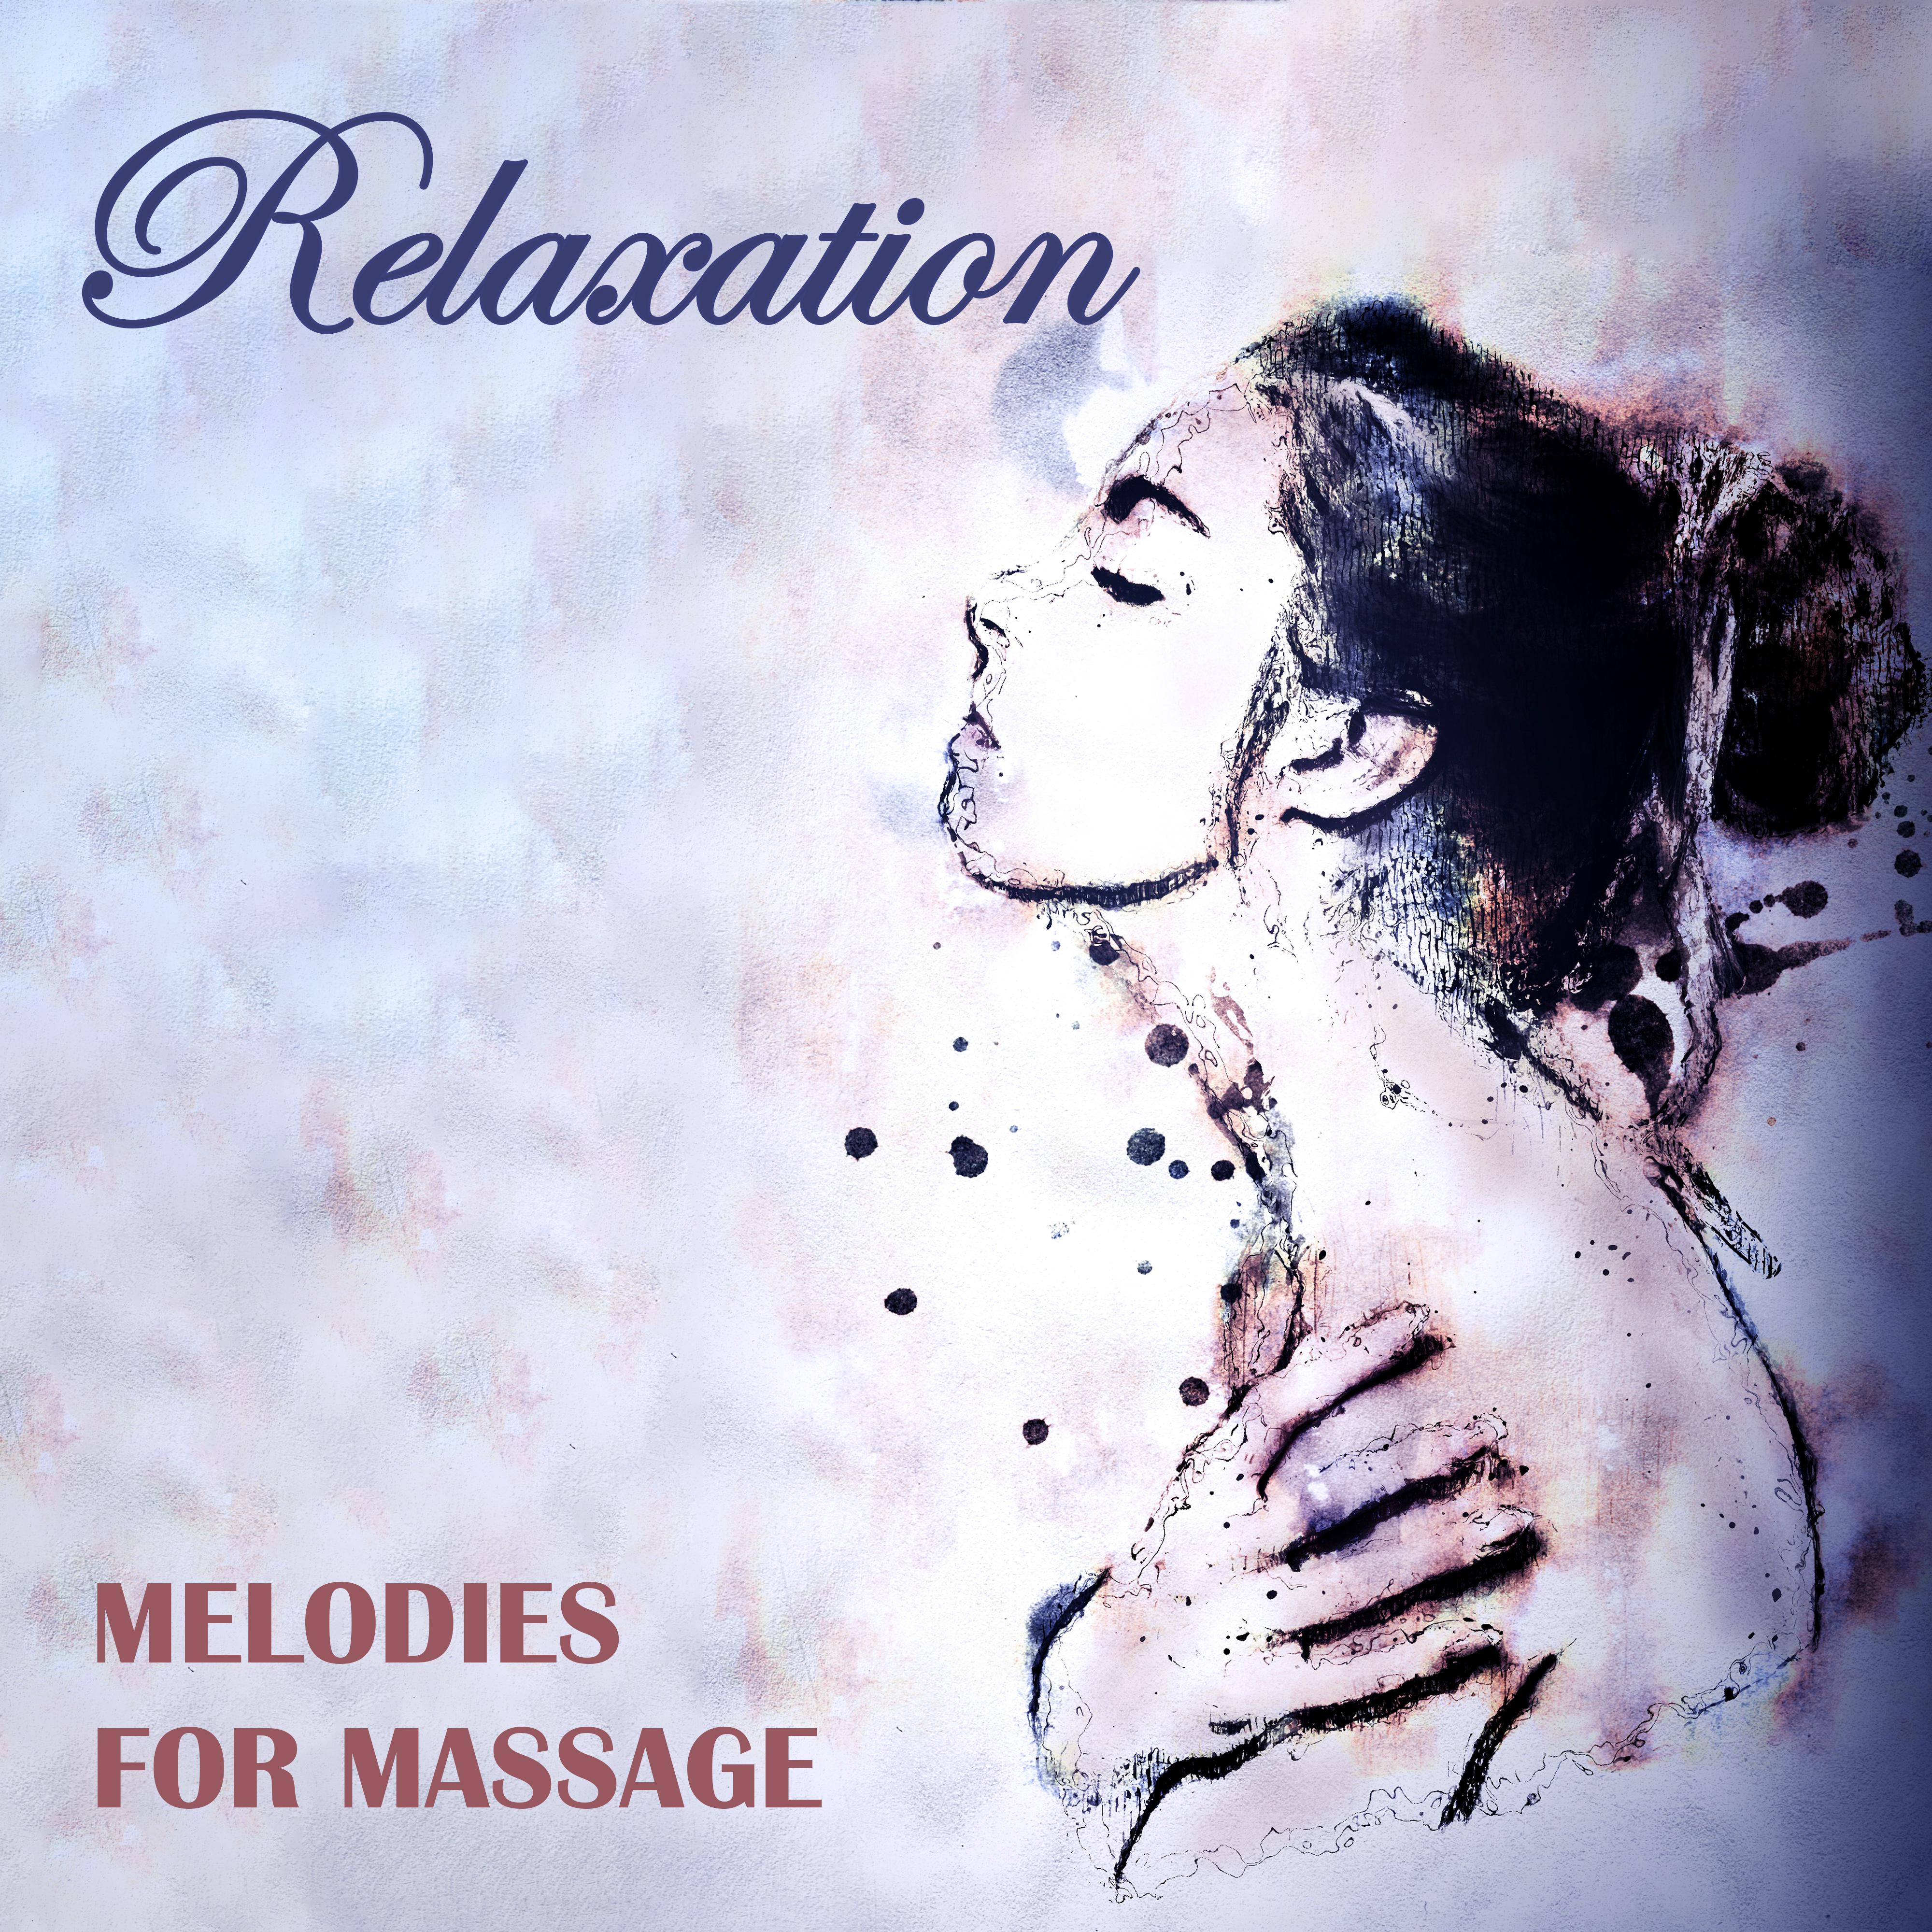 Relaxation Melodies for Massage